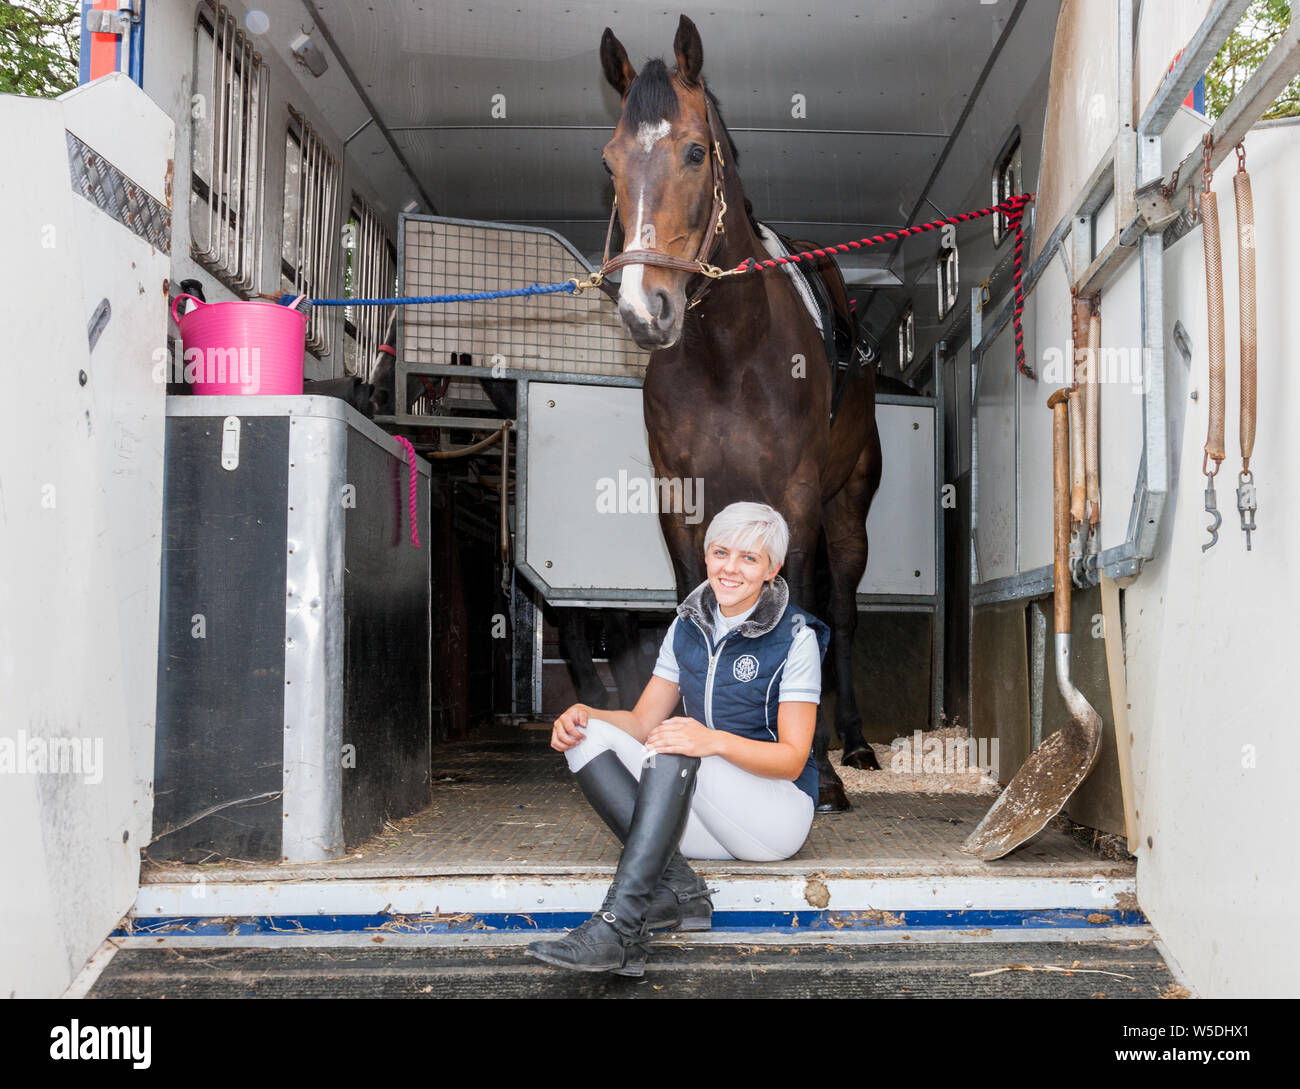 Carrigaline, Cork, Ireland. 28th July, 2019. Jamie Garland preparing her horse Zedlepplin prior to taking part in the 1.5m New Height Champions Series during the Premier Grand Prix, 3-day event that was held at the Maryville Equestrian Centre in Carrigaline, Co. Cork, Ireland.Credit;  David Creedon / Alamy Live News Stock Photo